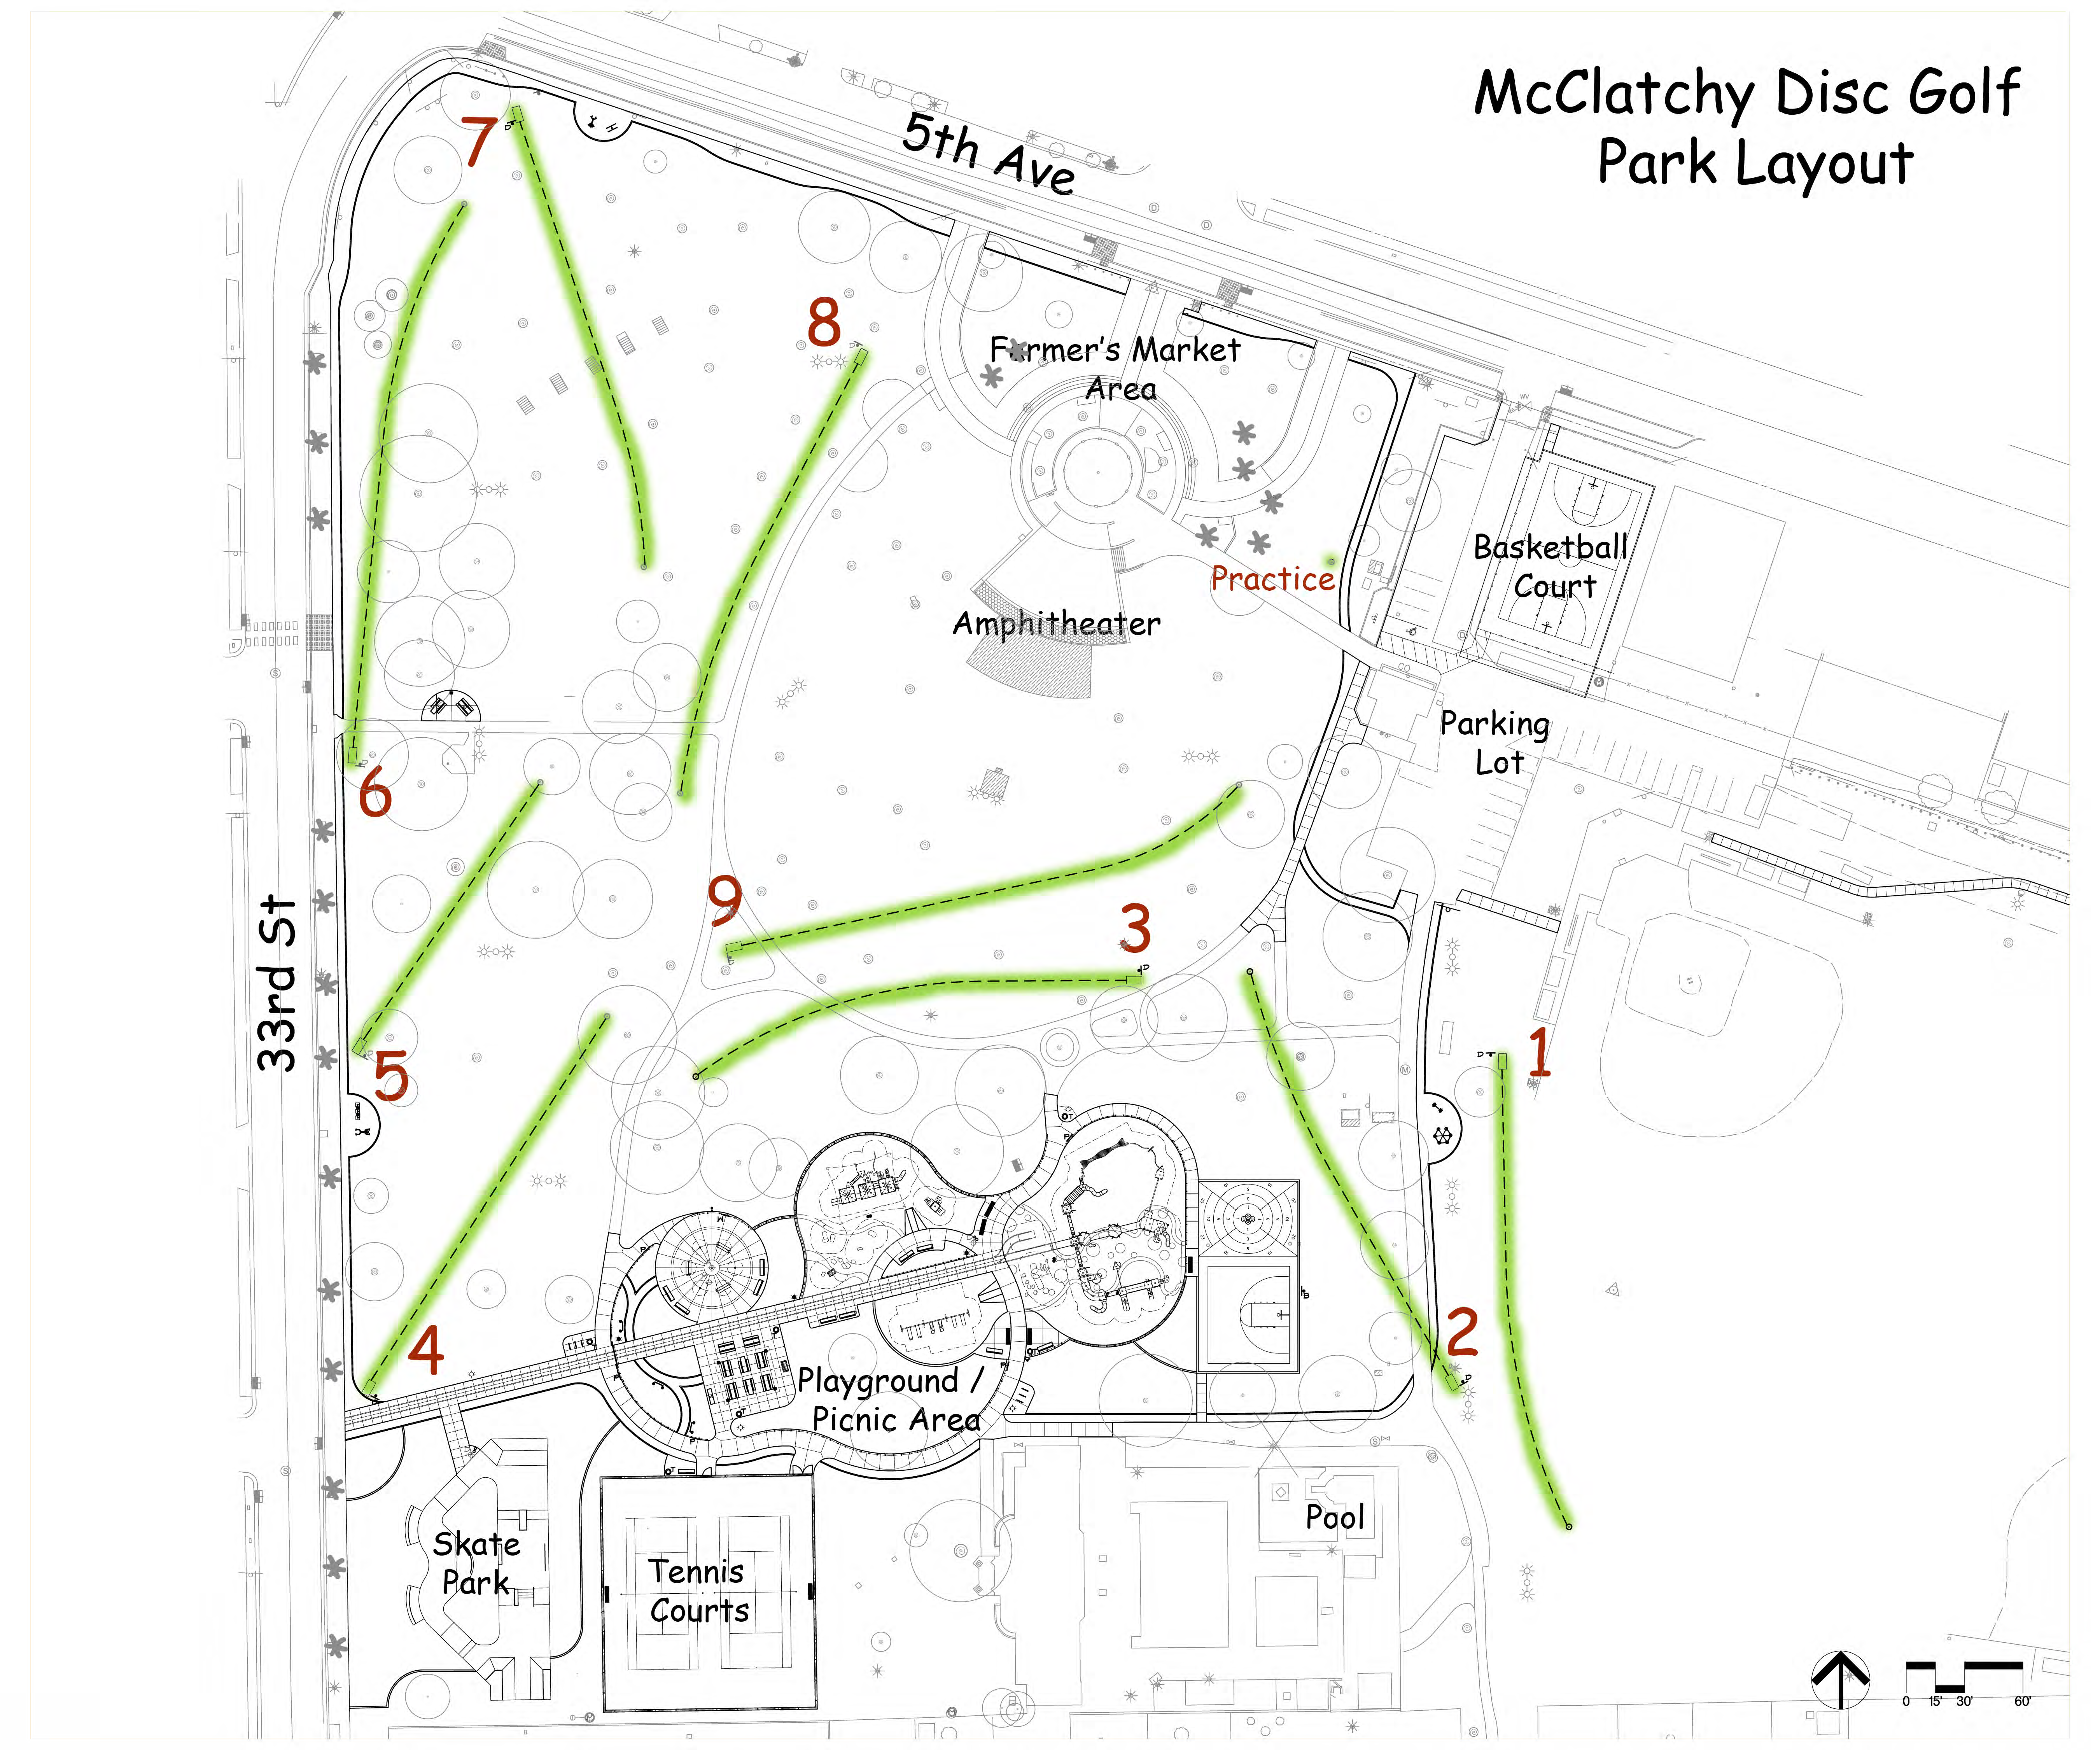 McClatchy Park and Disc Golf Course Grand Opening October 18th 3